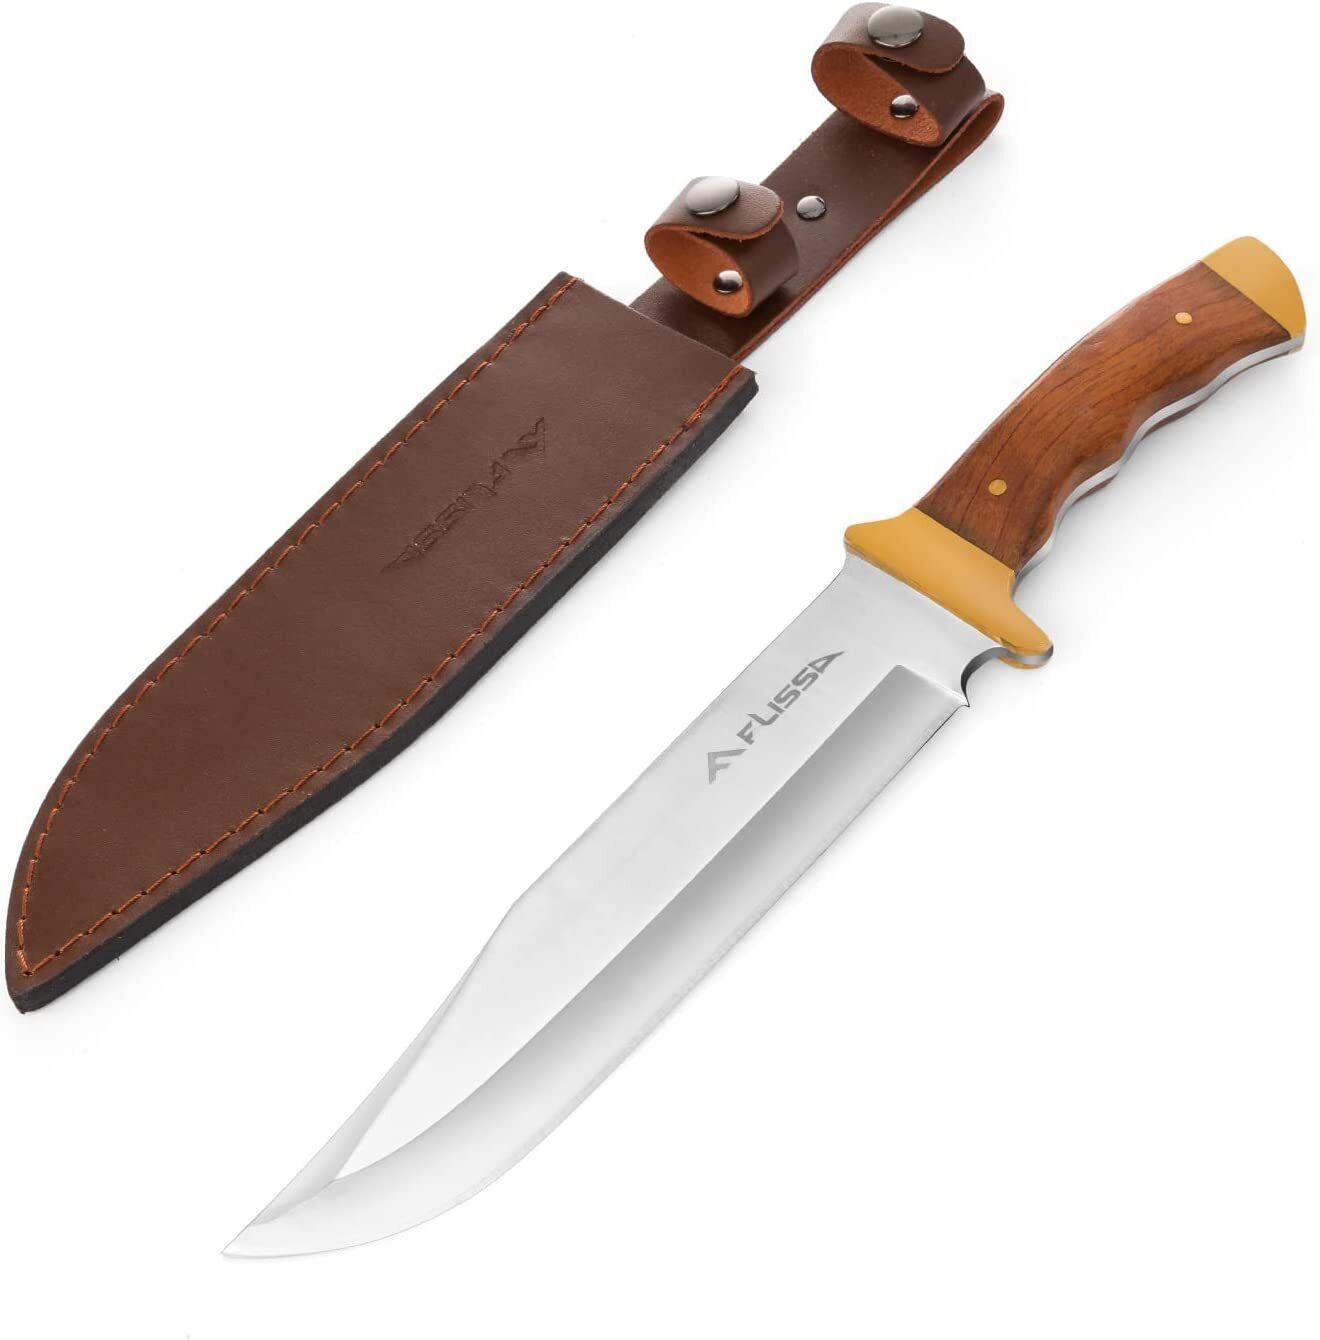 FLISSA 14-inch Bowie Hunting Knife Full-Tang with Leather Sheath Rosewood Handle